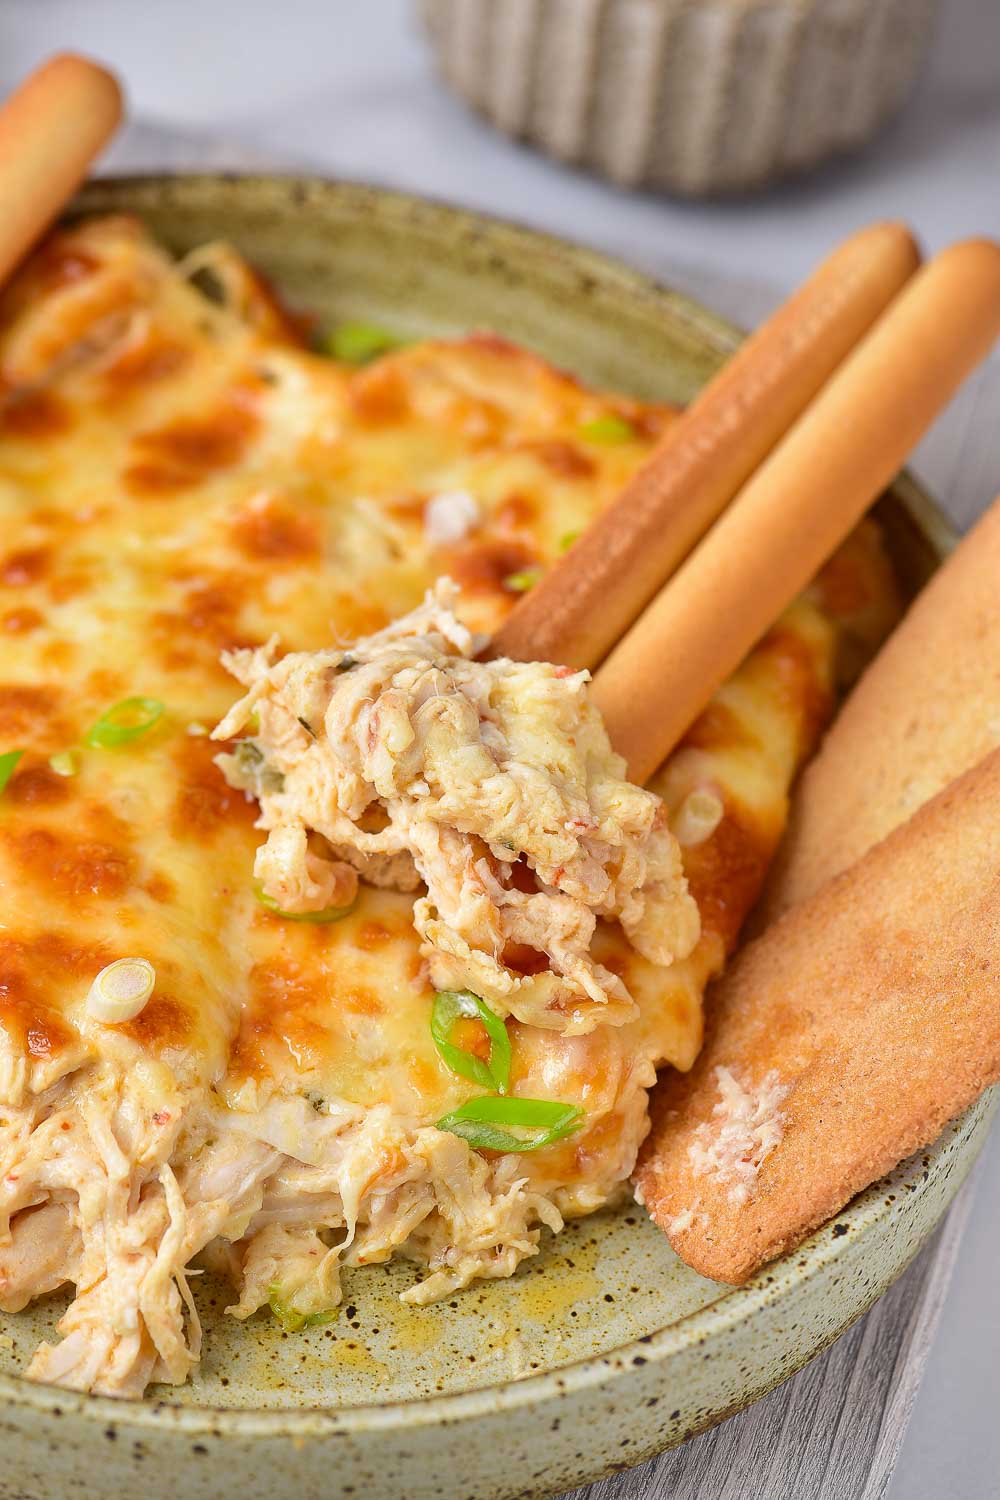 If you’d like to have Easy Baked Buffalo Chicken Dip, this creamy dip recipe is for you! If you're a fan of buffalo sauce, you won't want to miss this one. Serve this no-hassle dip over air fryer chicken, steak quesadillas, or jalapeno poppers! 